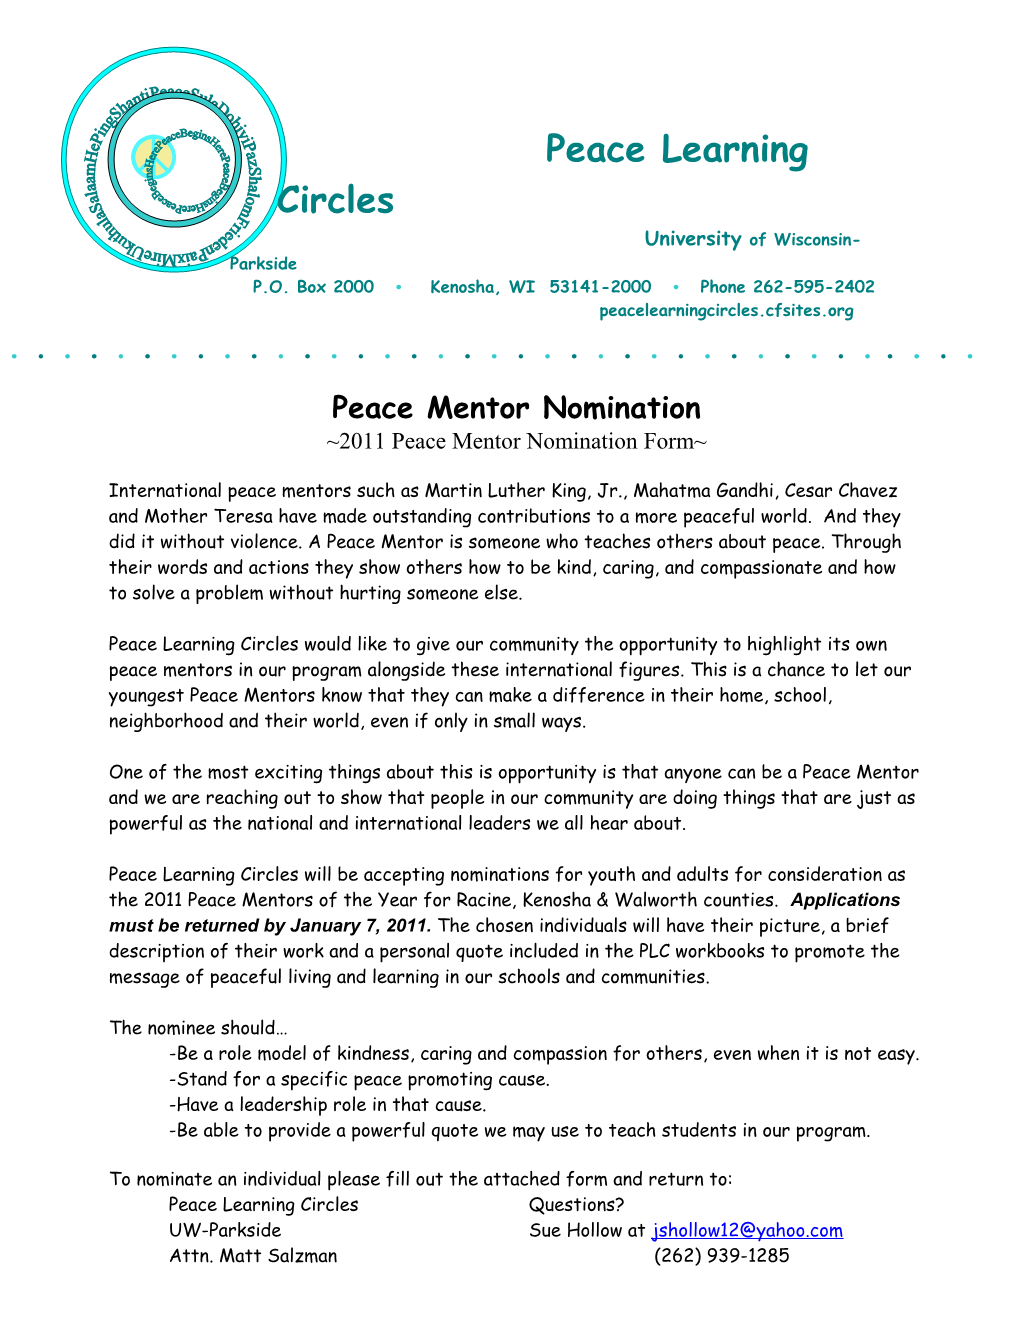 Peace Learning Circles